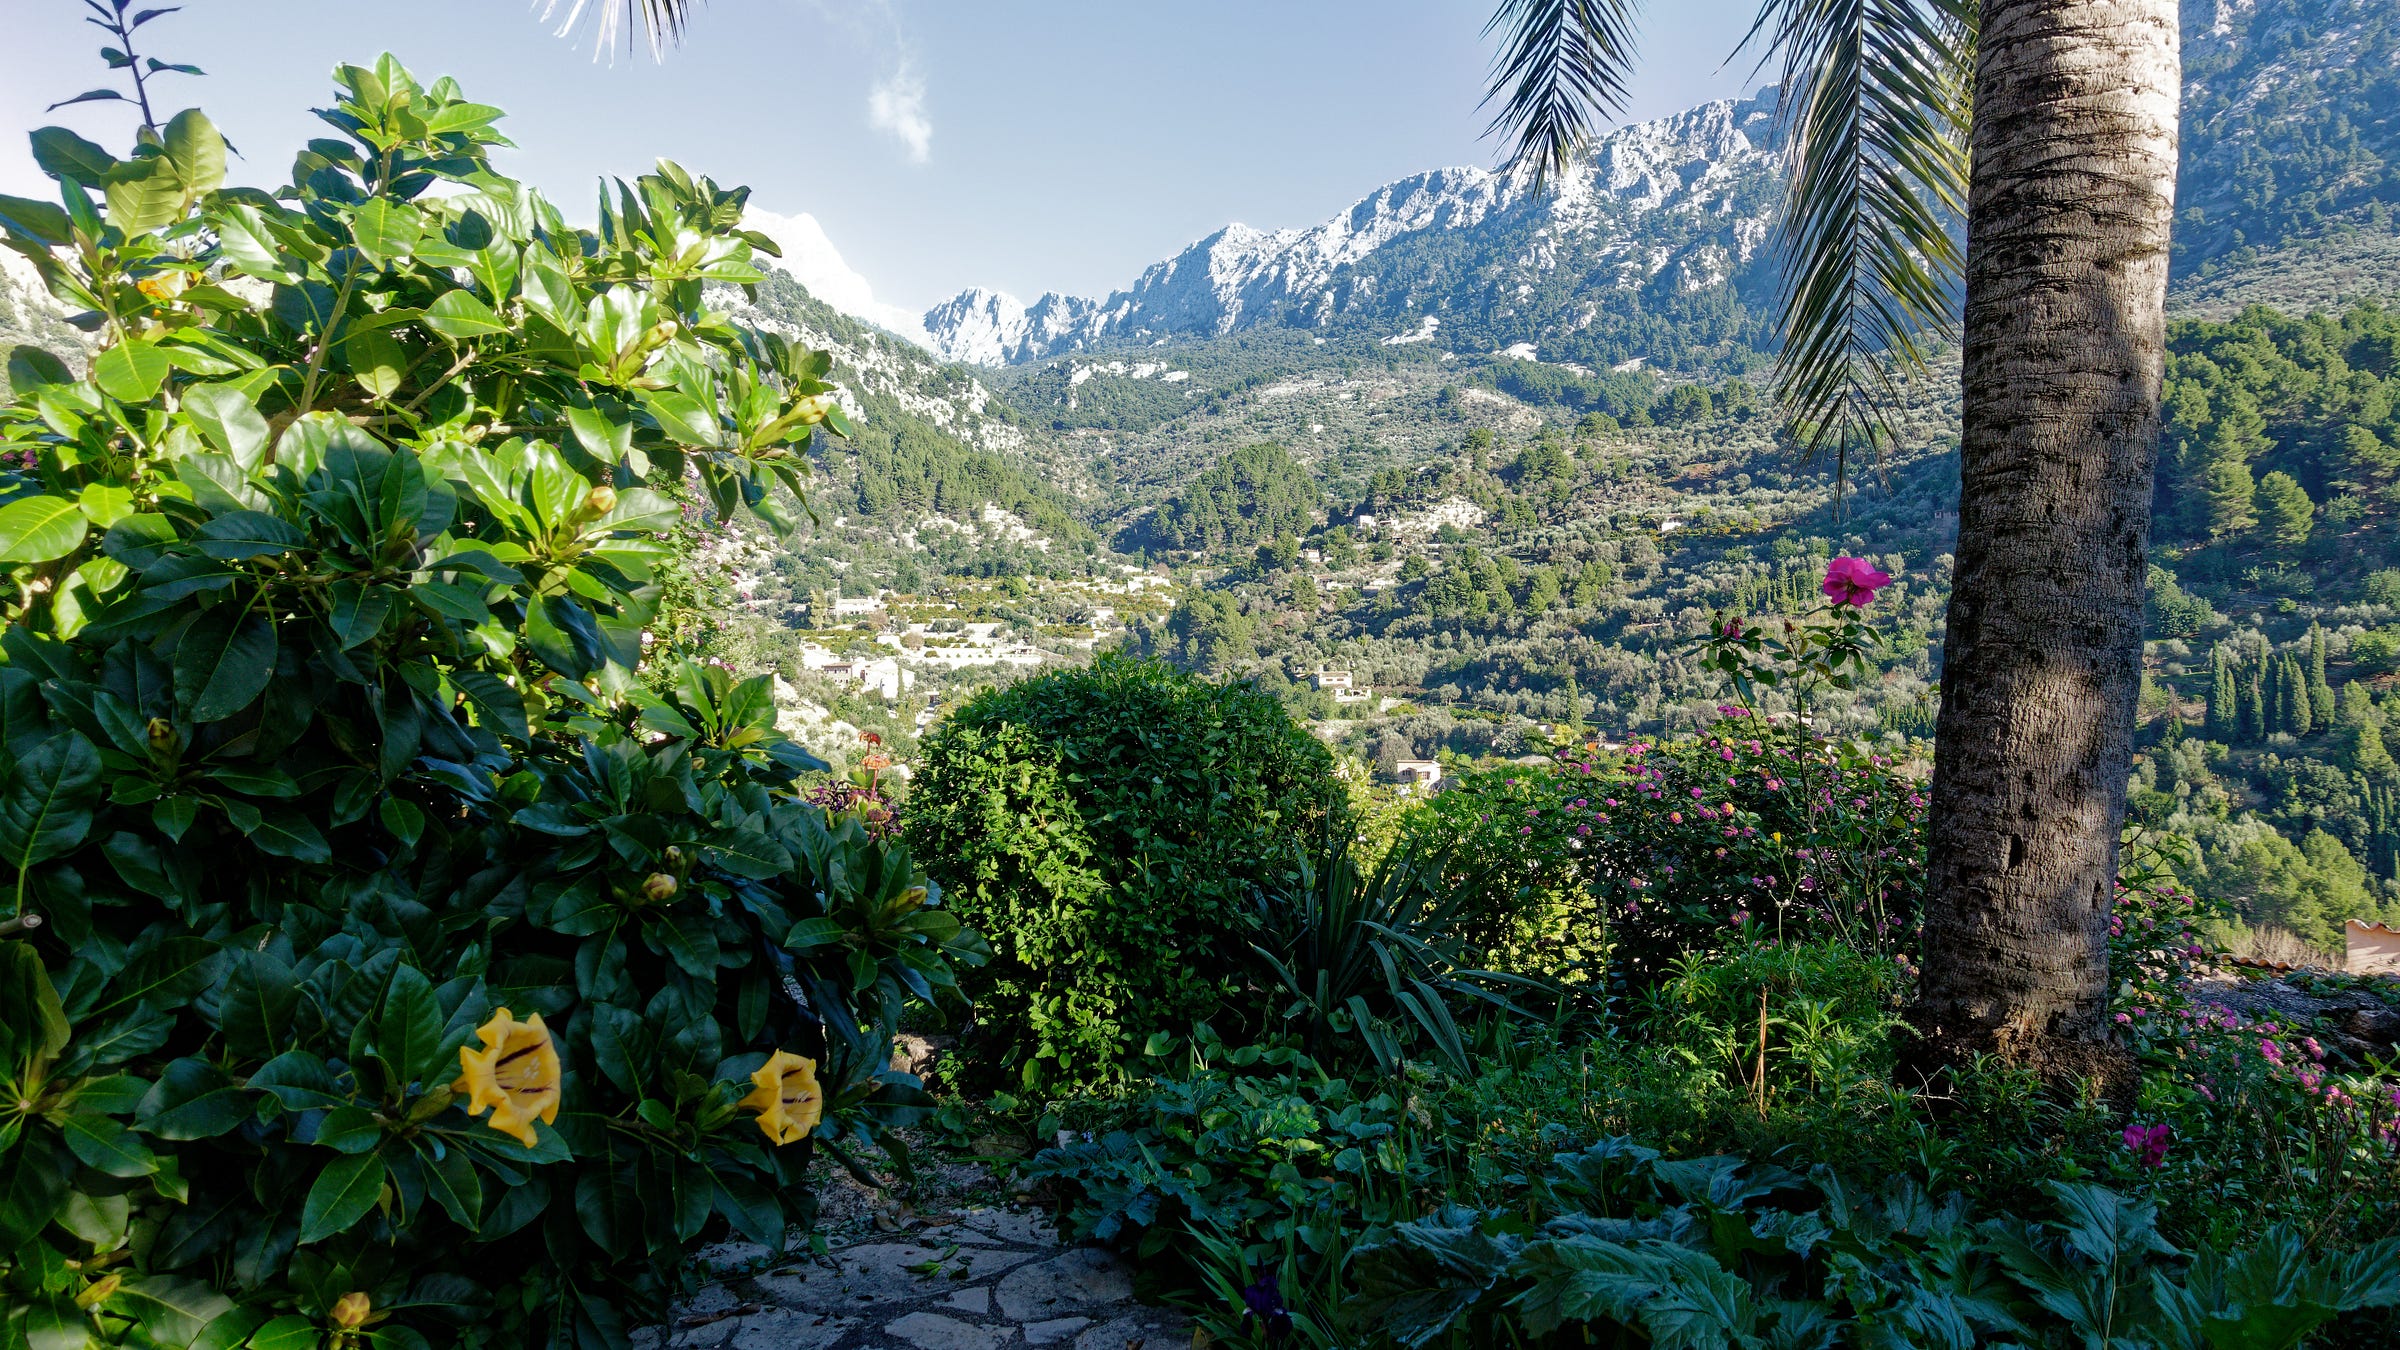 View of the Serra de Tramuntana from a private garden in Fornalutx